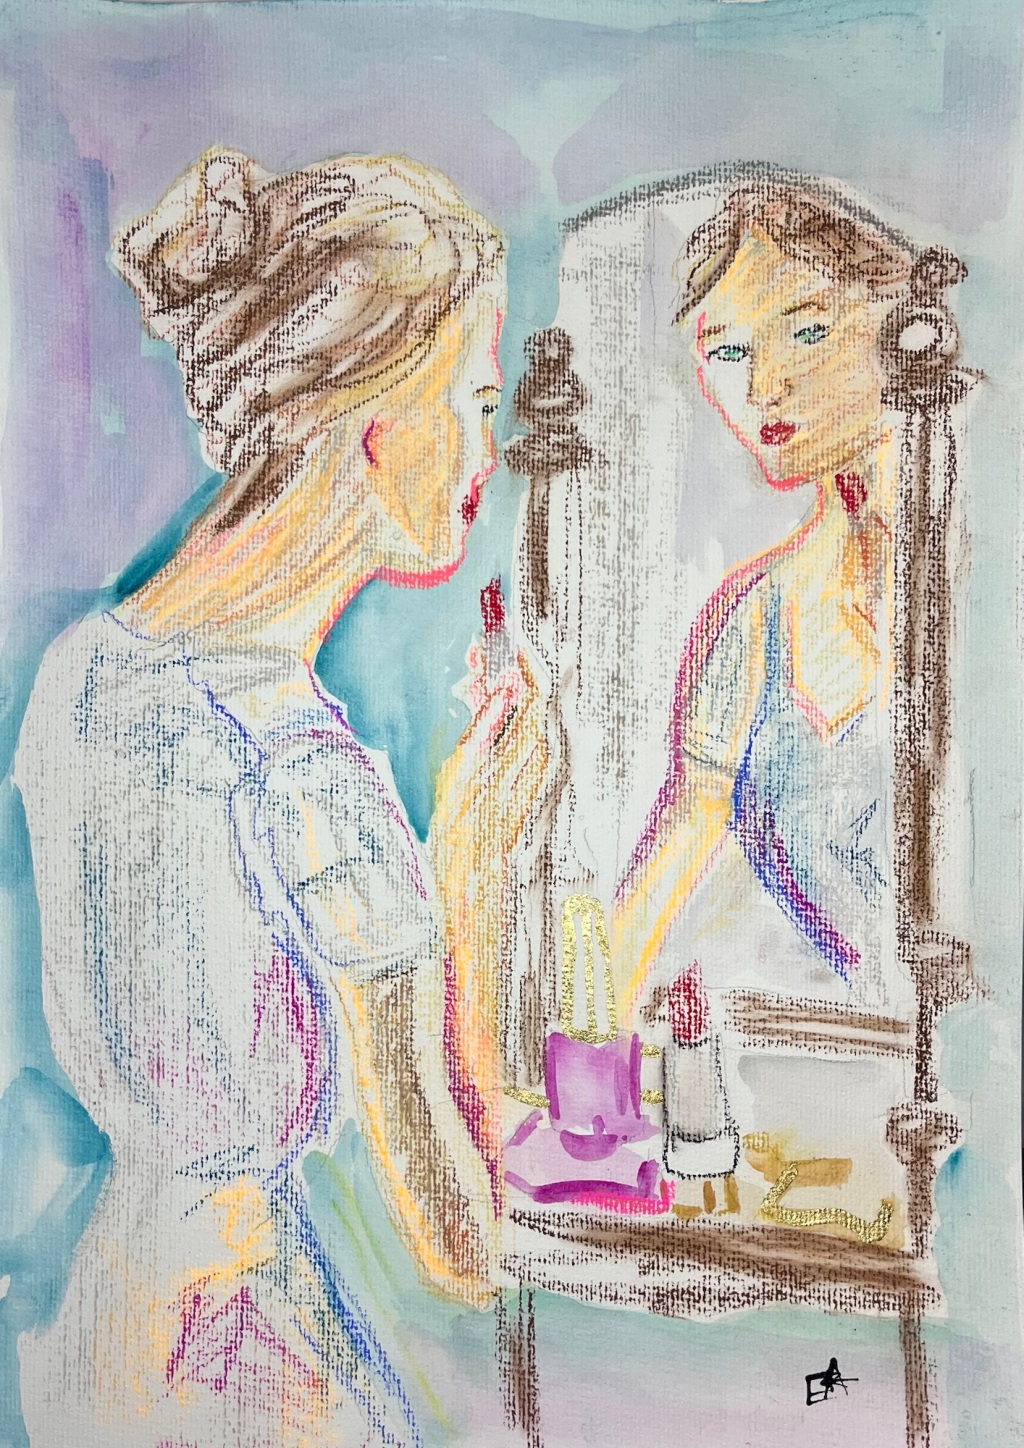 Sketching a woman putting lipstick on in a mirror